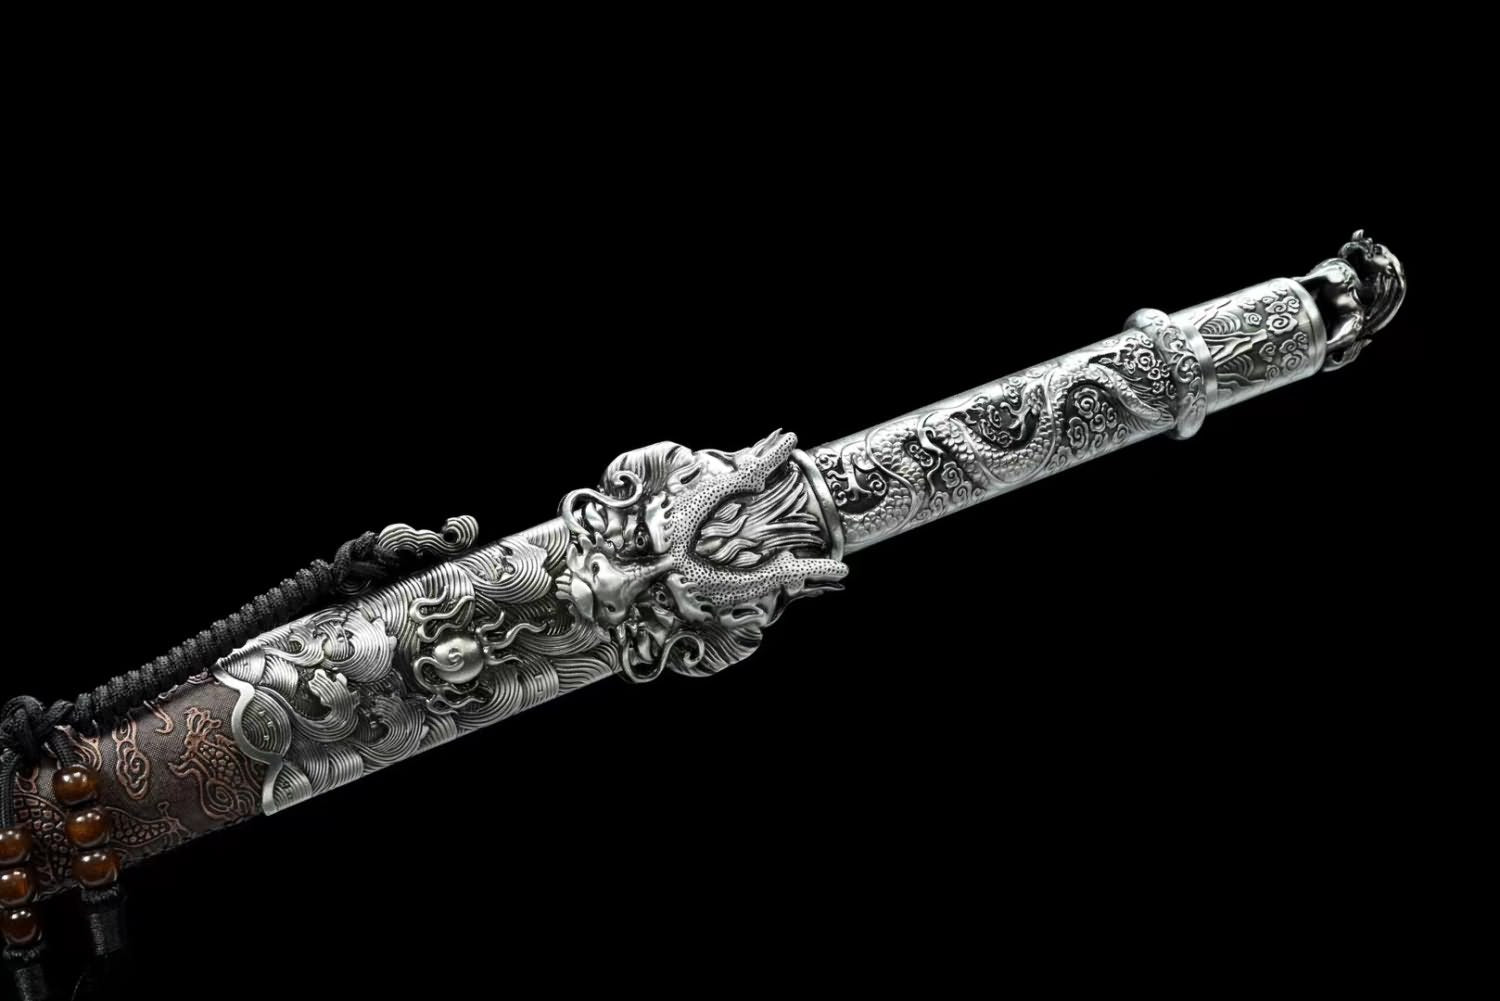 LOONGSWORD,Dragon King Swords with Forged High Carbon Steel Etched Blade-Faux Leather Scabbard